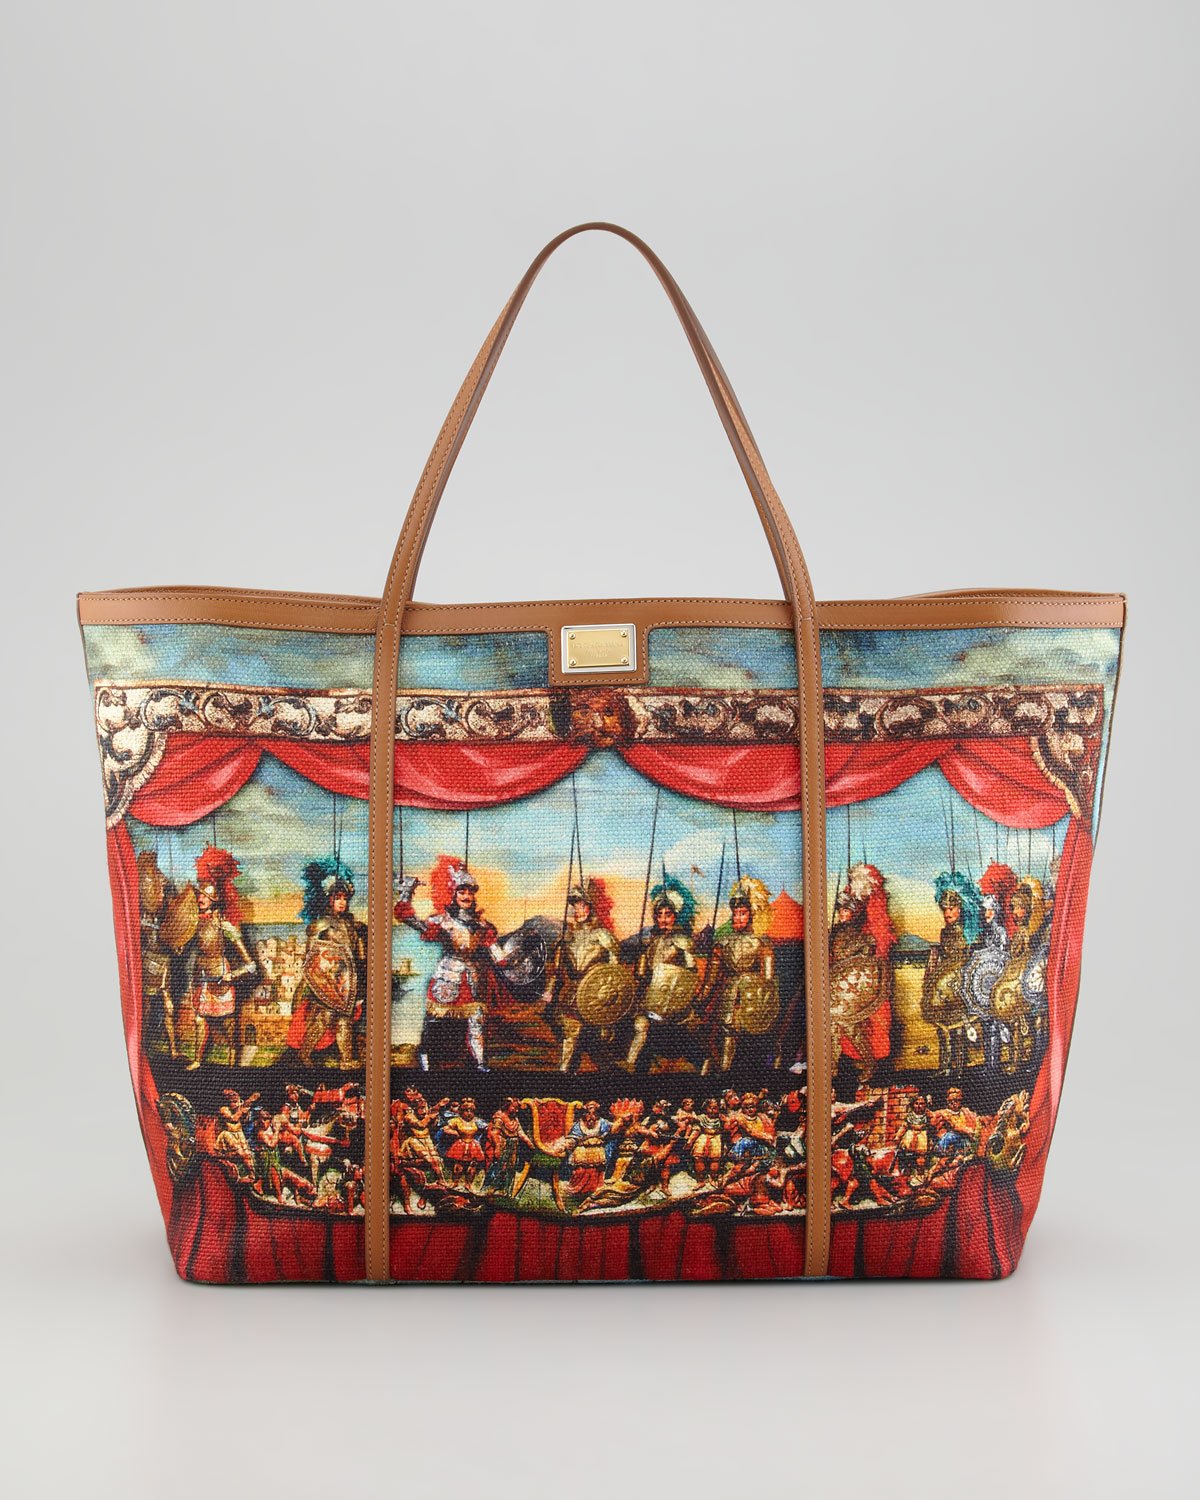 Lyst - Dolce & Gabbana Printed Canvas Tote Bag